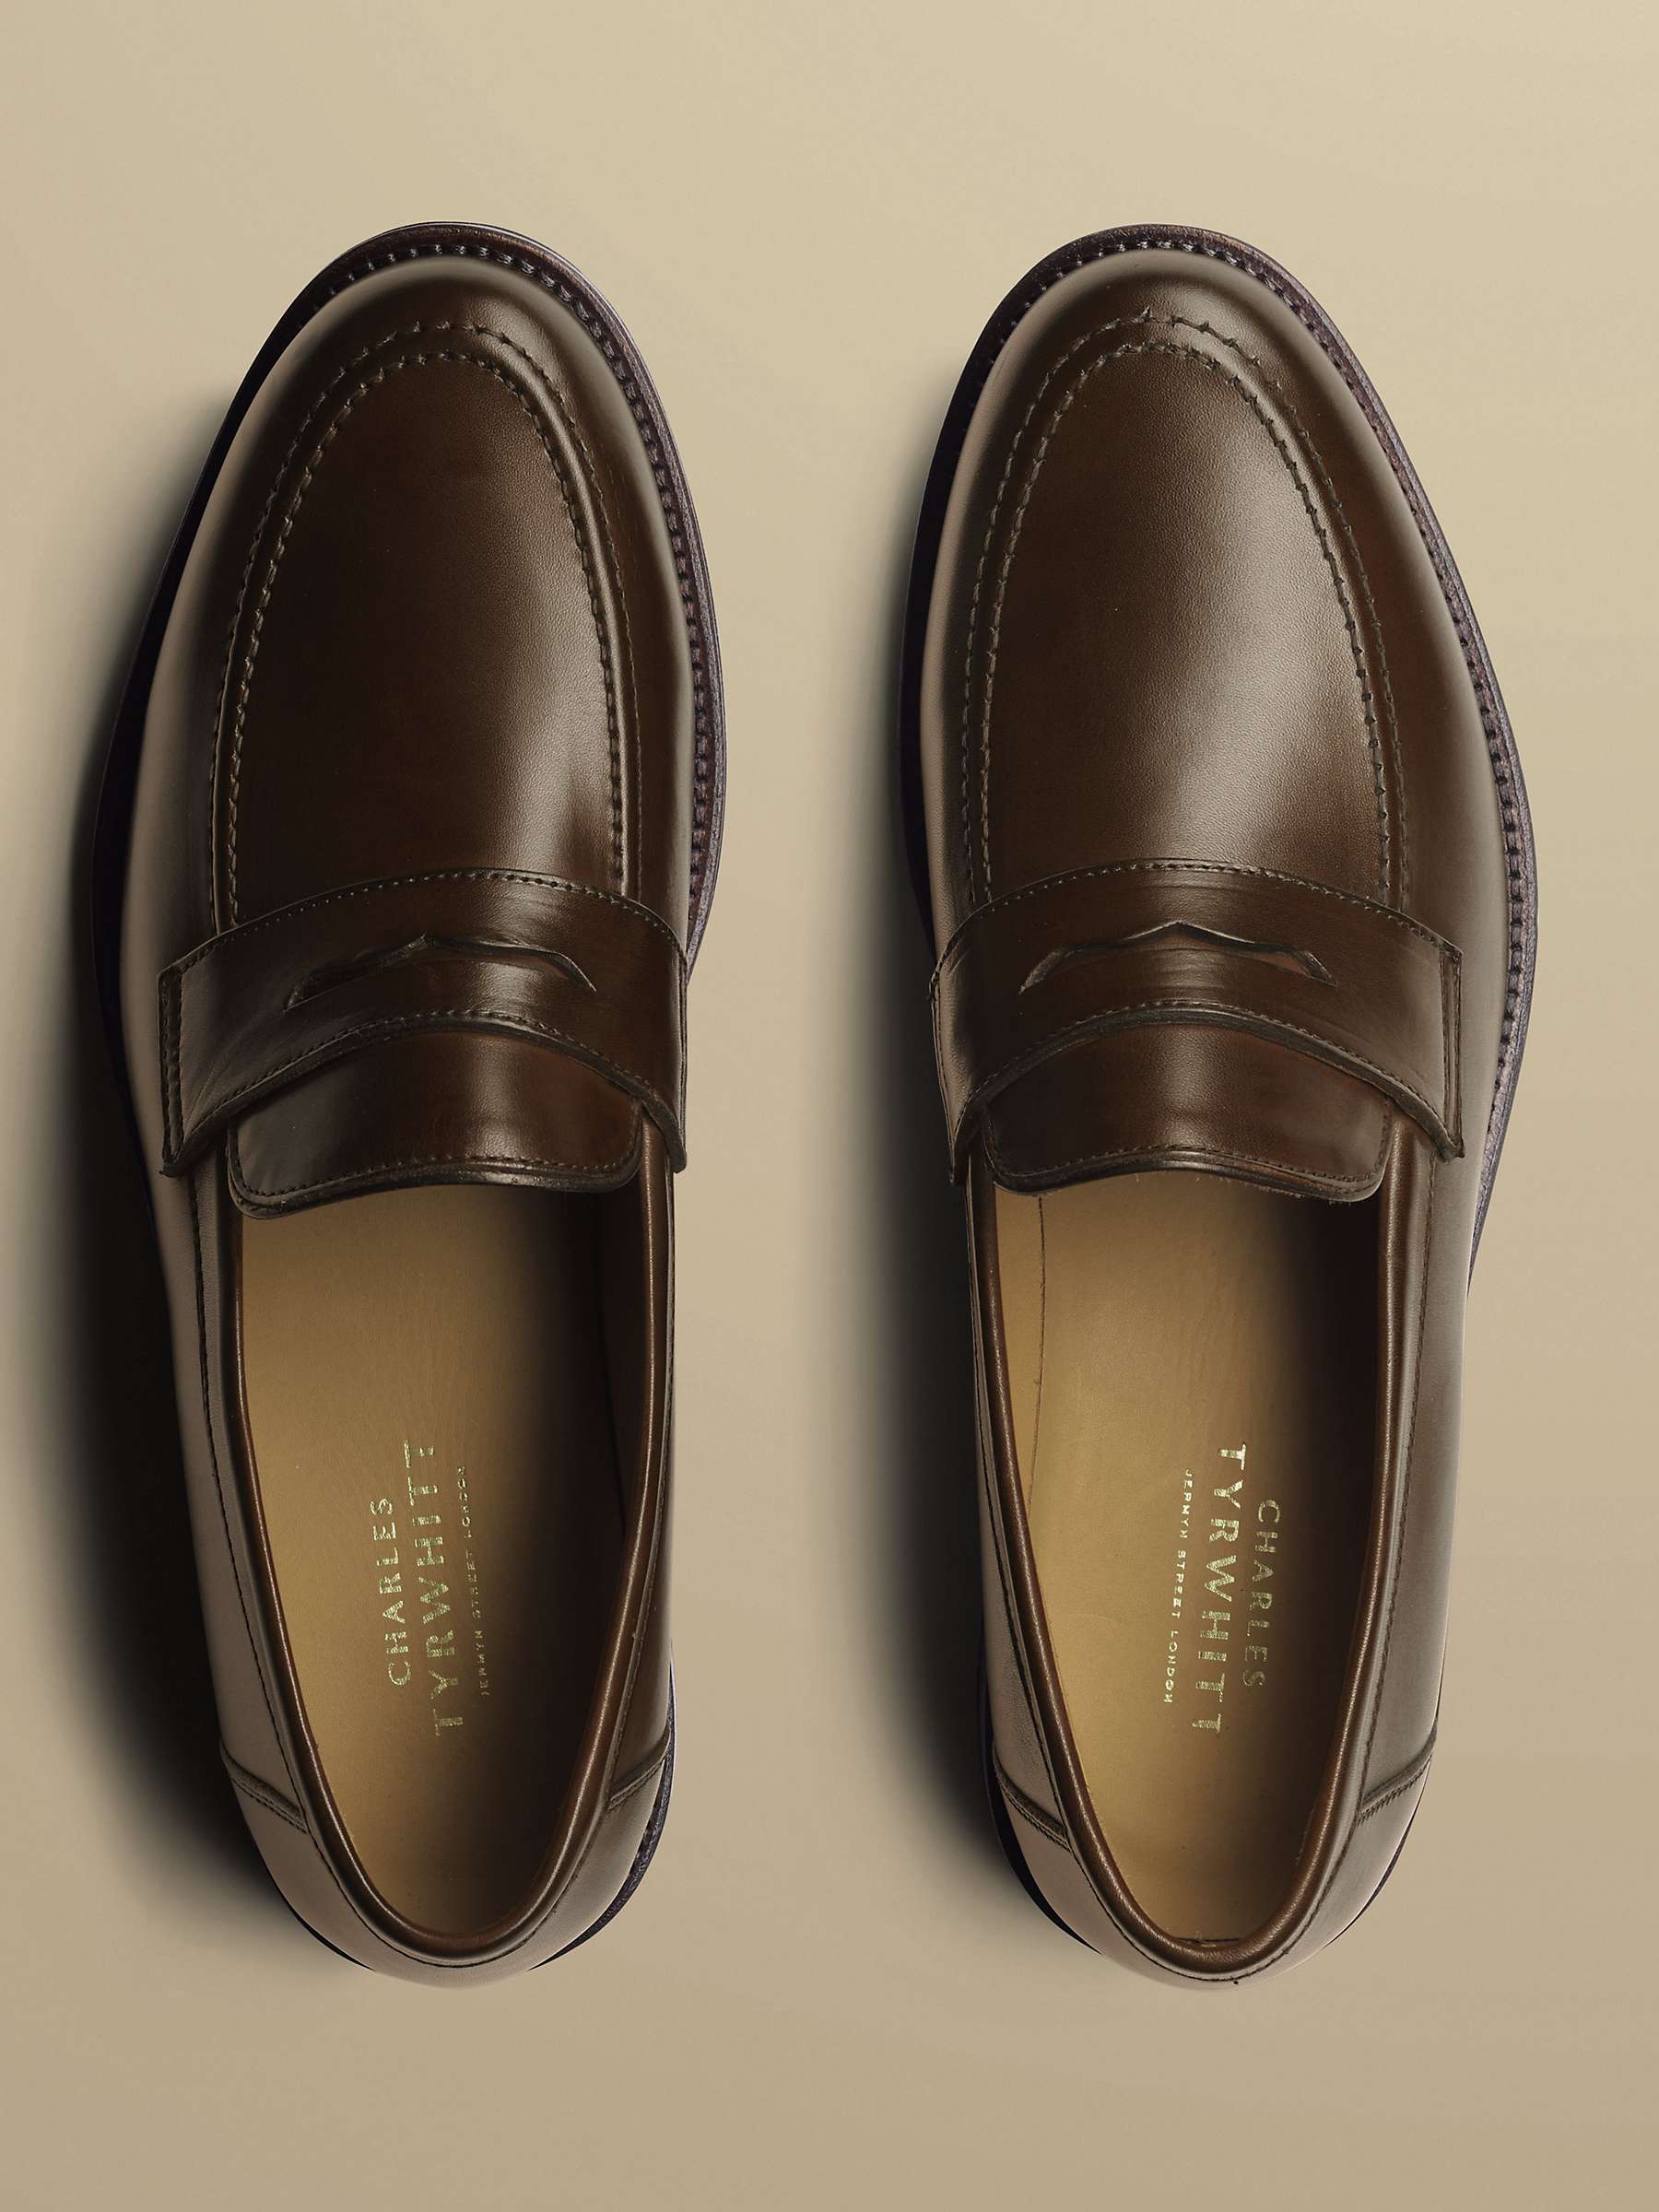 Buy Charles Tyrwhitt Leather Apron Loafers Online at johnlewis.com